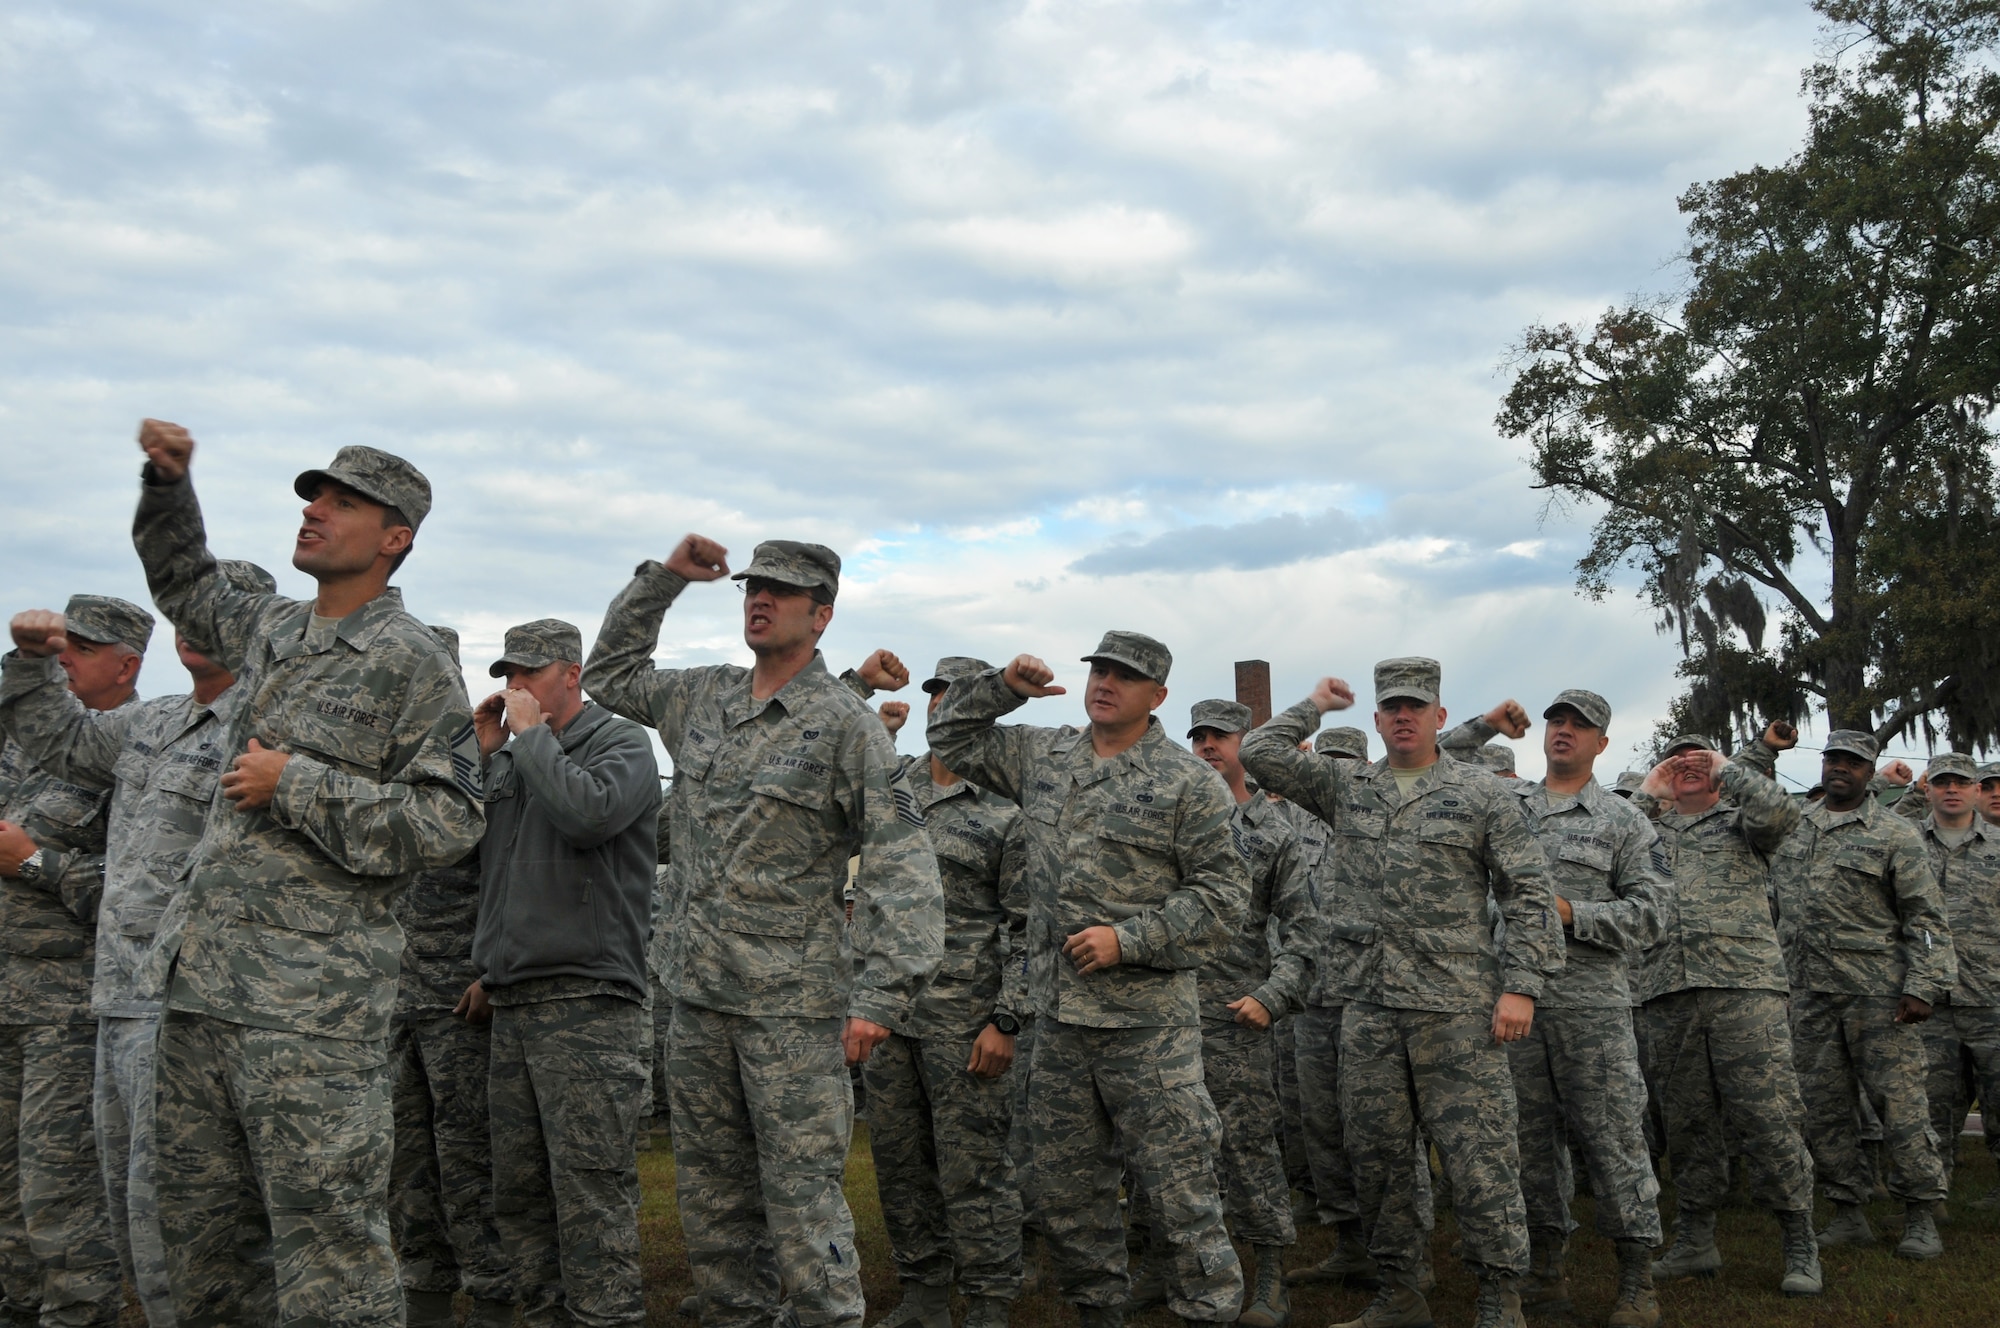 Airmen from the Air Force Reserve Command Recruiting Service give a cheer during their annual readiness training event Nov. 5 at the Combat Readiness Training Center in Savannah, Ga. The Reserve recruiters, who have the best recruiter-to-accession ratio in the Defense Department, recently earned the Air Force Organizational Excellence Award. (U.S. Air Force photo by Master Sgt. Shawn J. Jones)